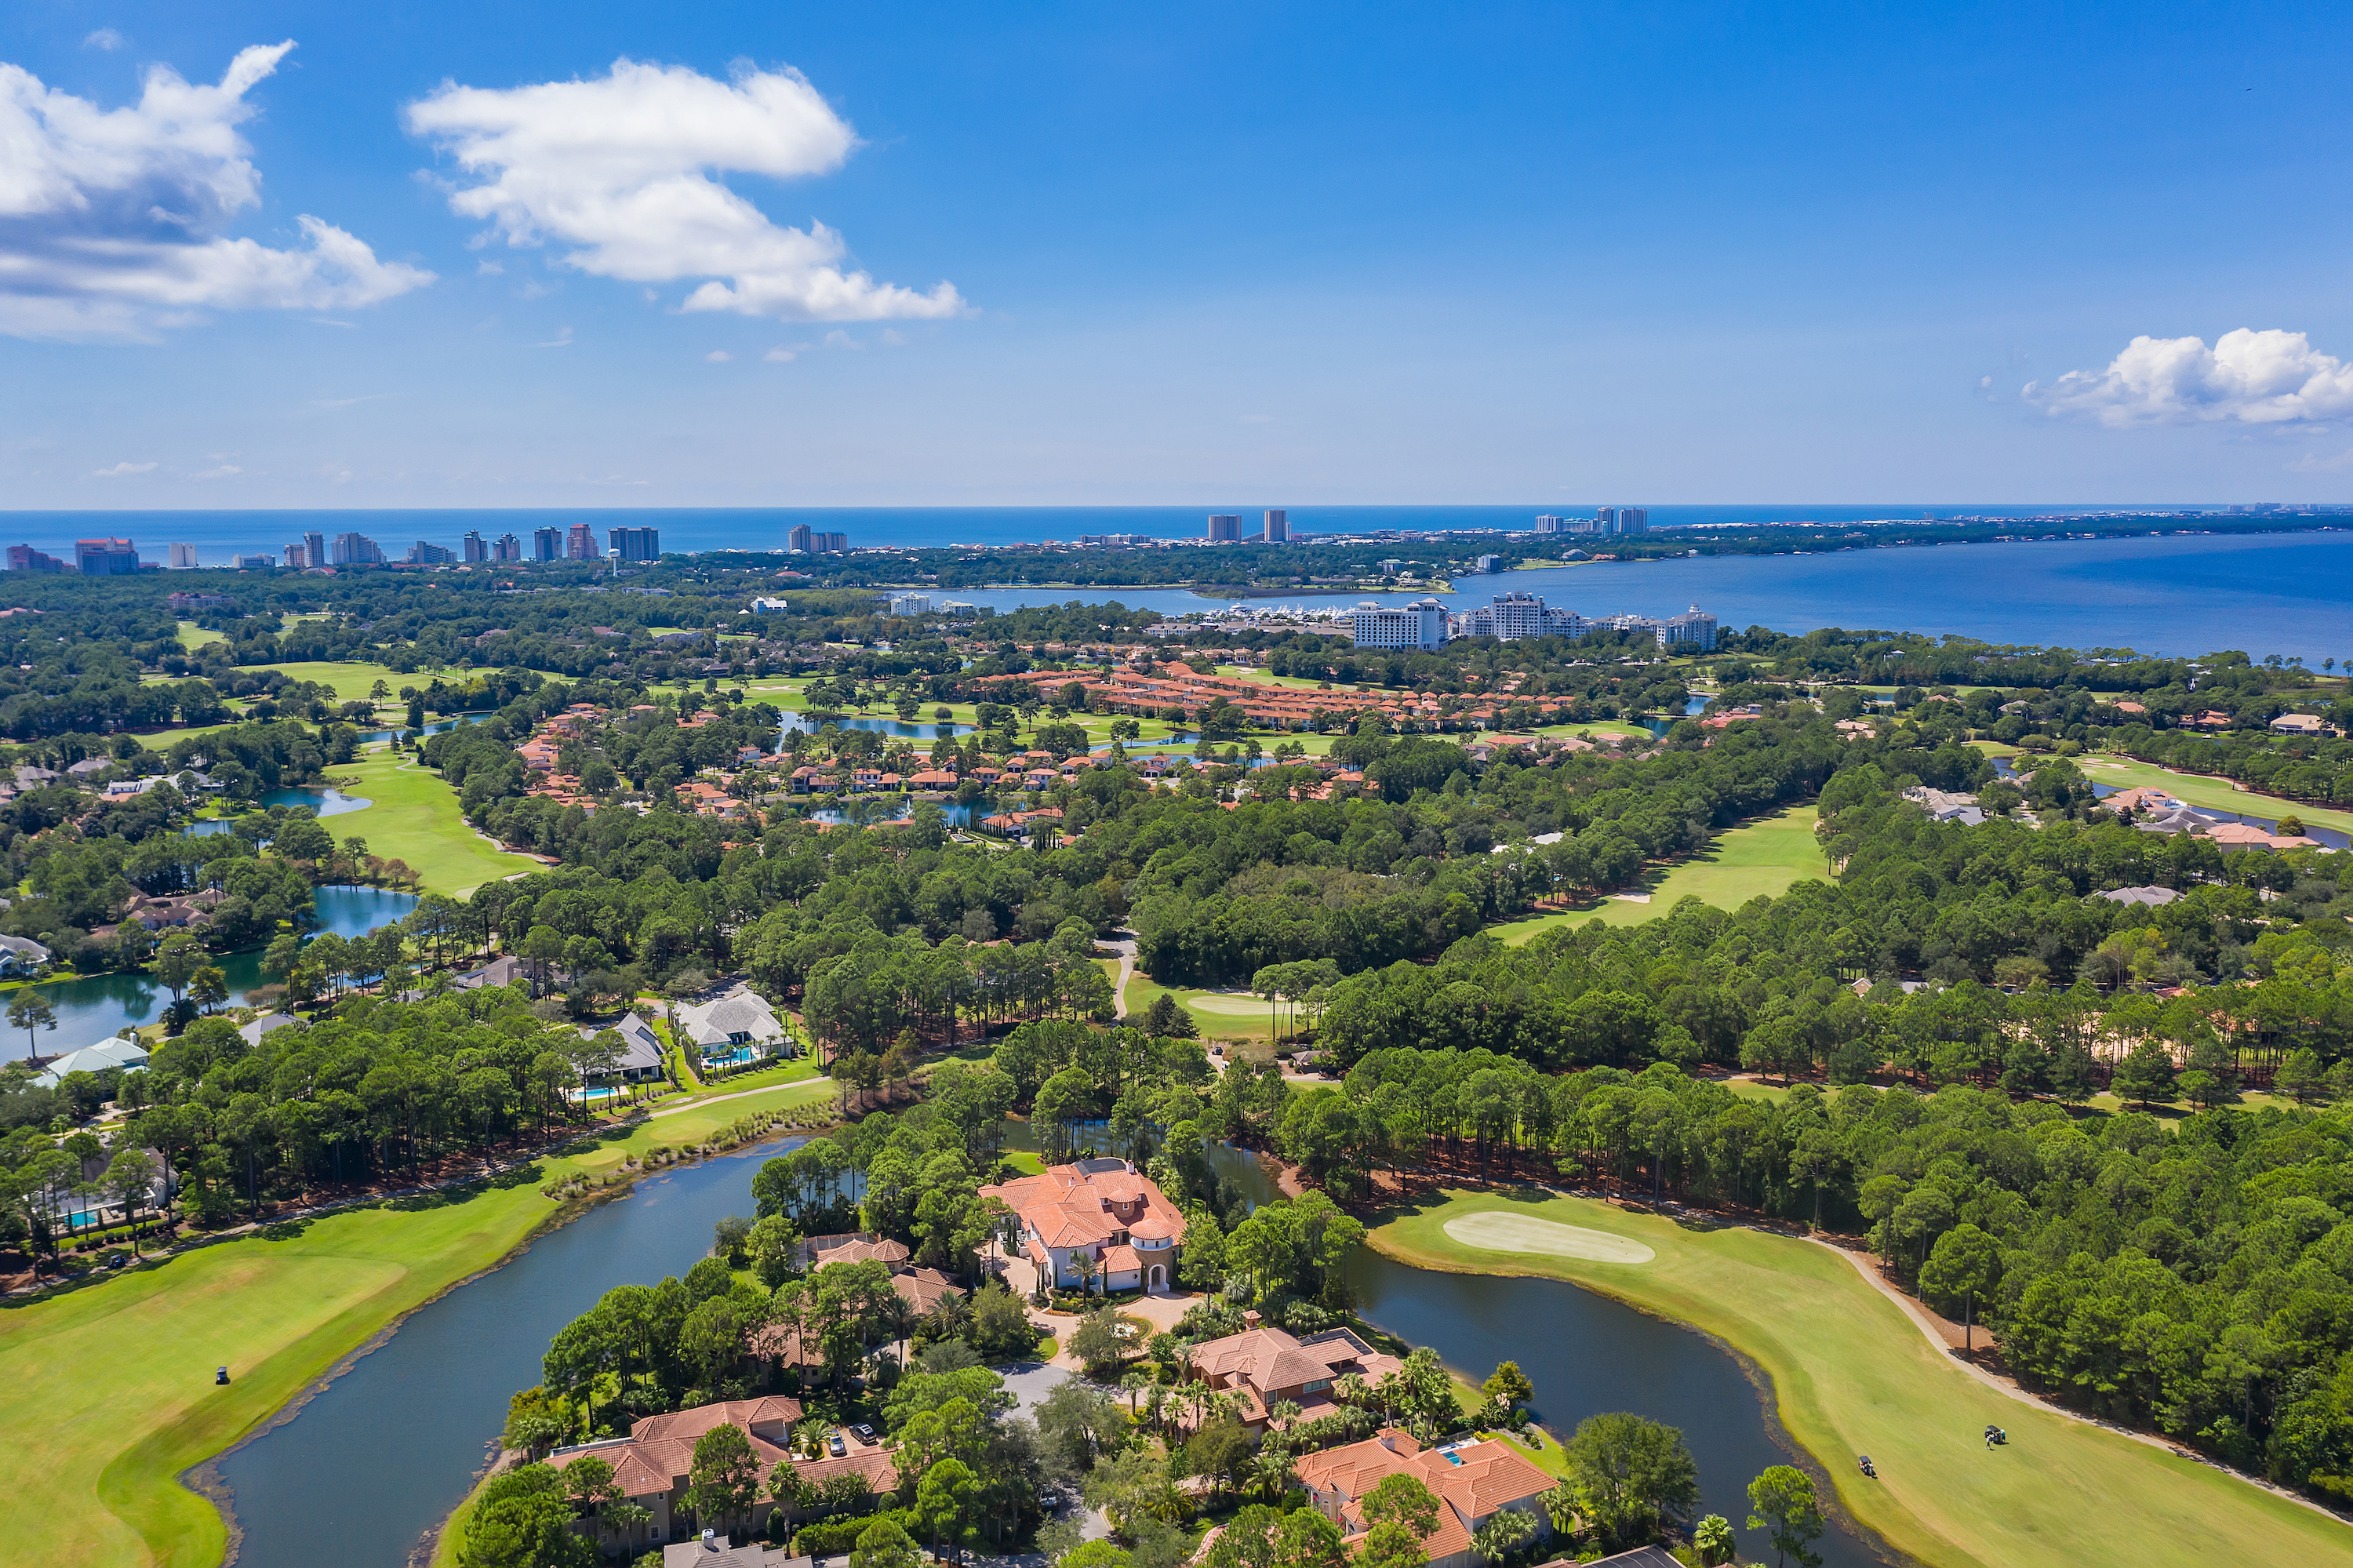 An aerial view of Sandestin homes and golf course with Choctawhatchee Bay in the background on a blue sky day